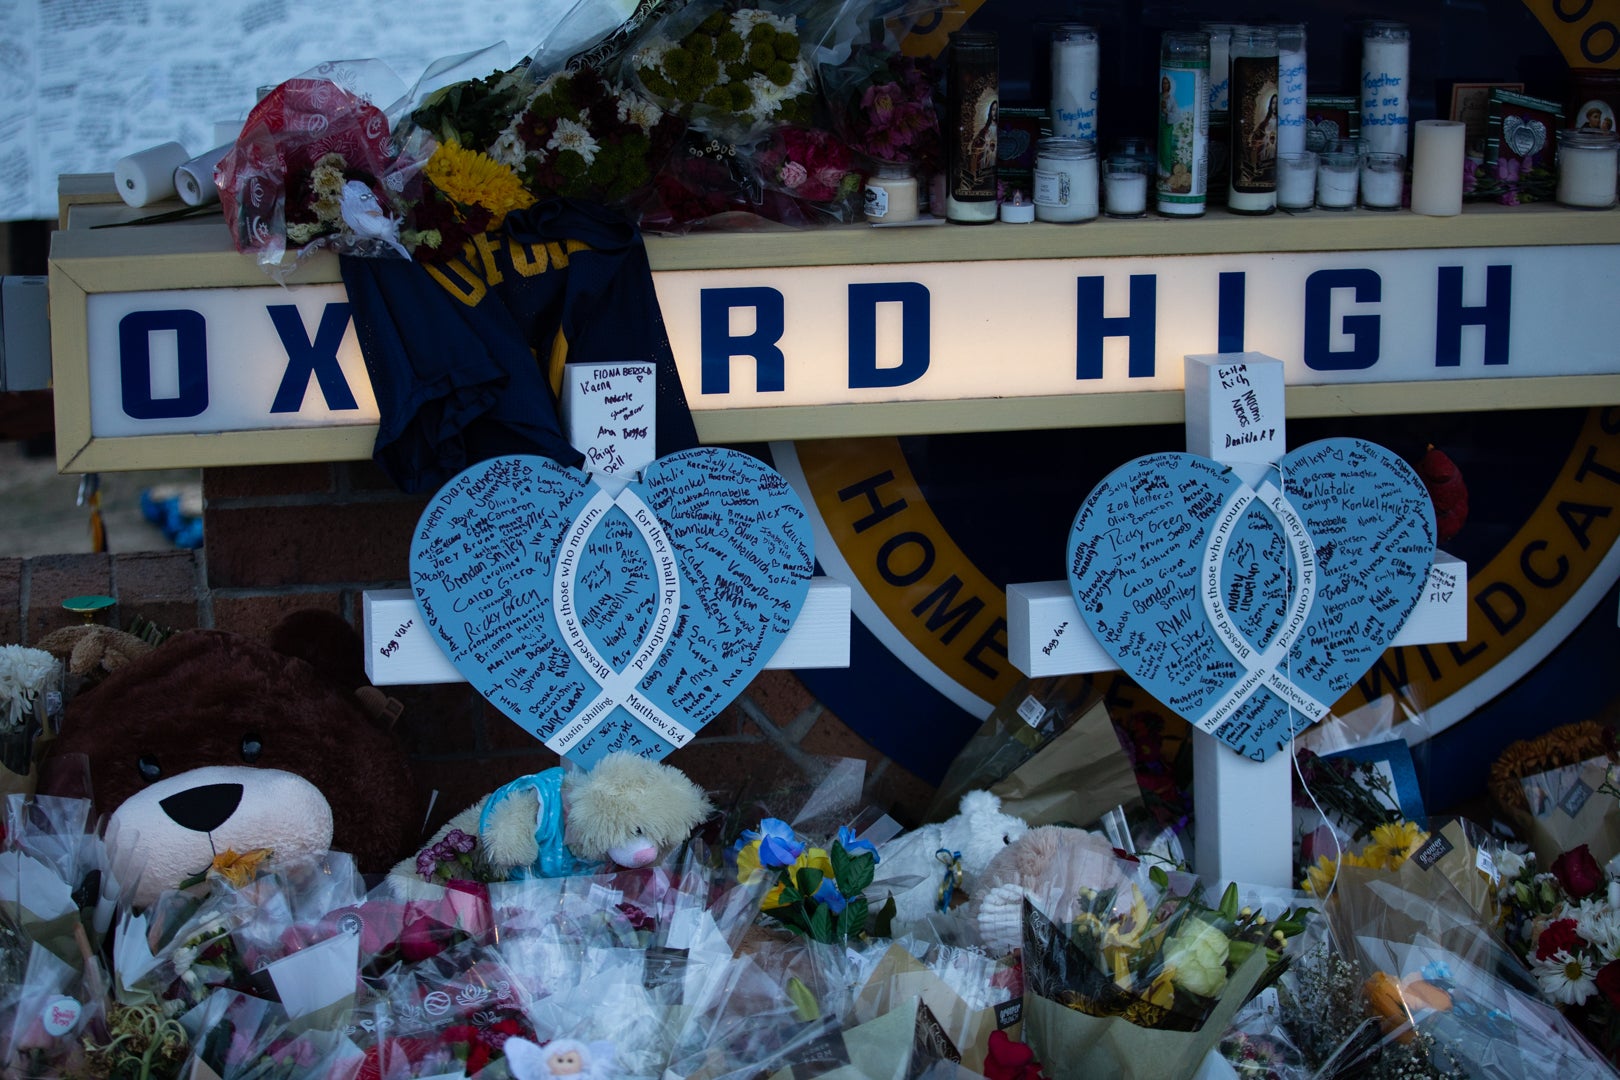 A makeshift memorial outside of Oxford High School following the massacre